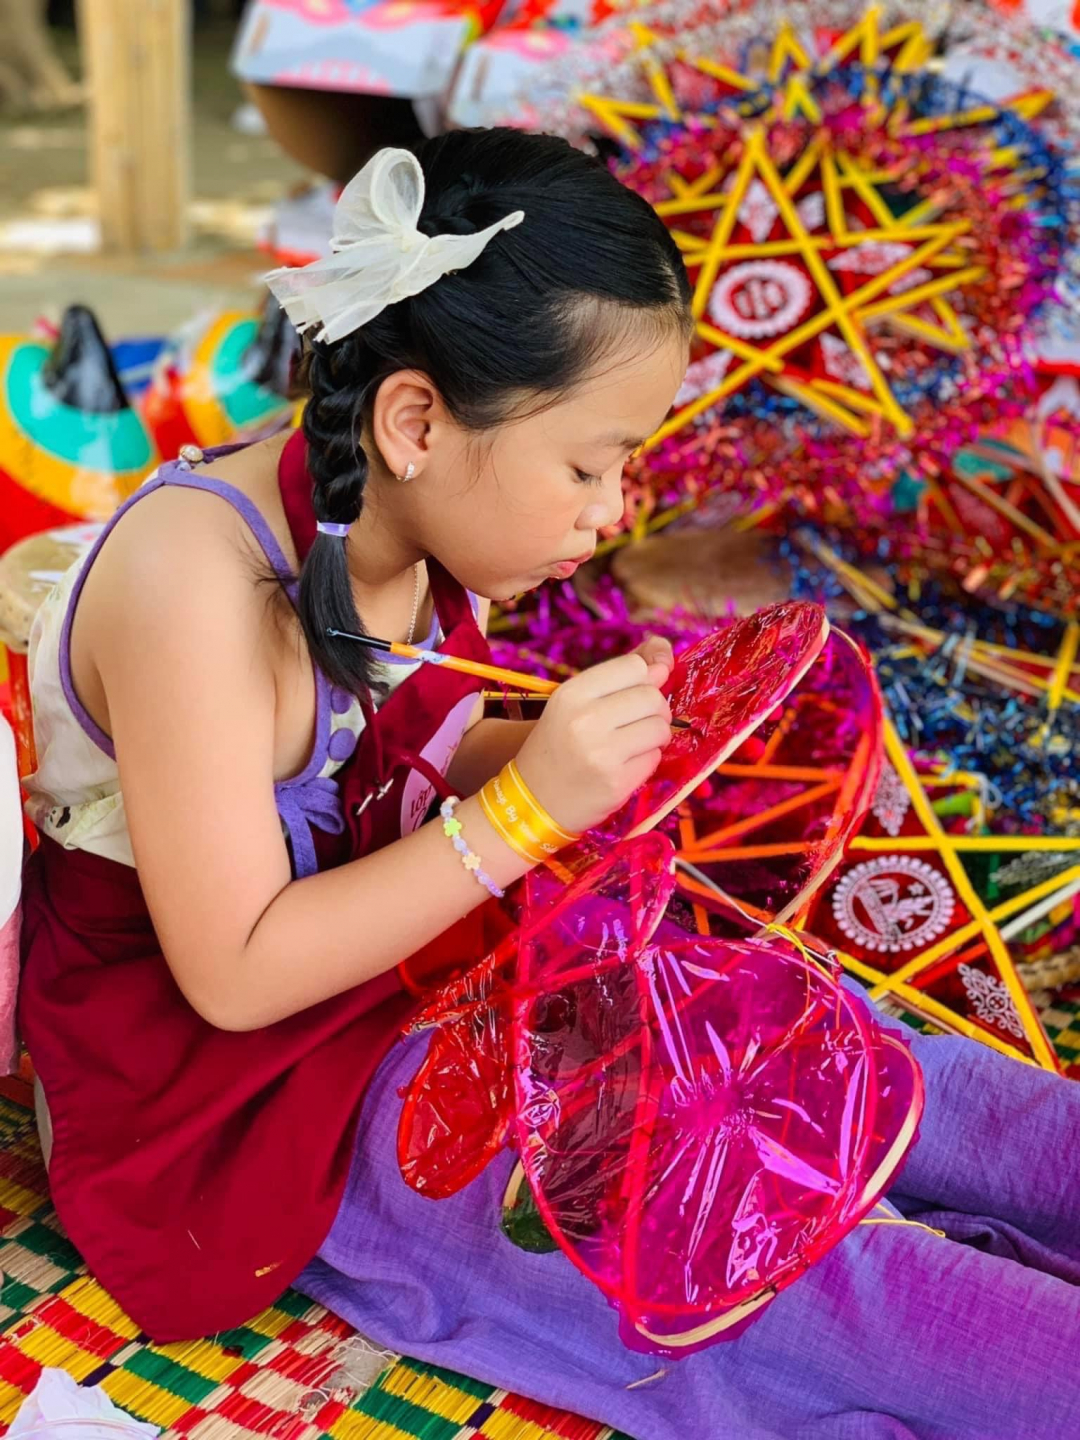 A girl decorating her Mid-Autumn lantern

